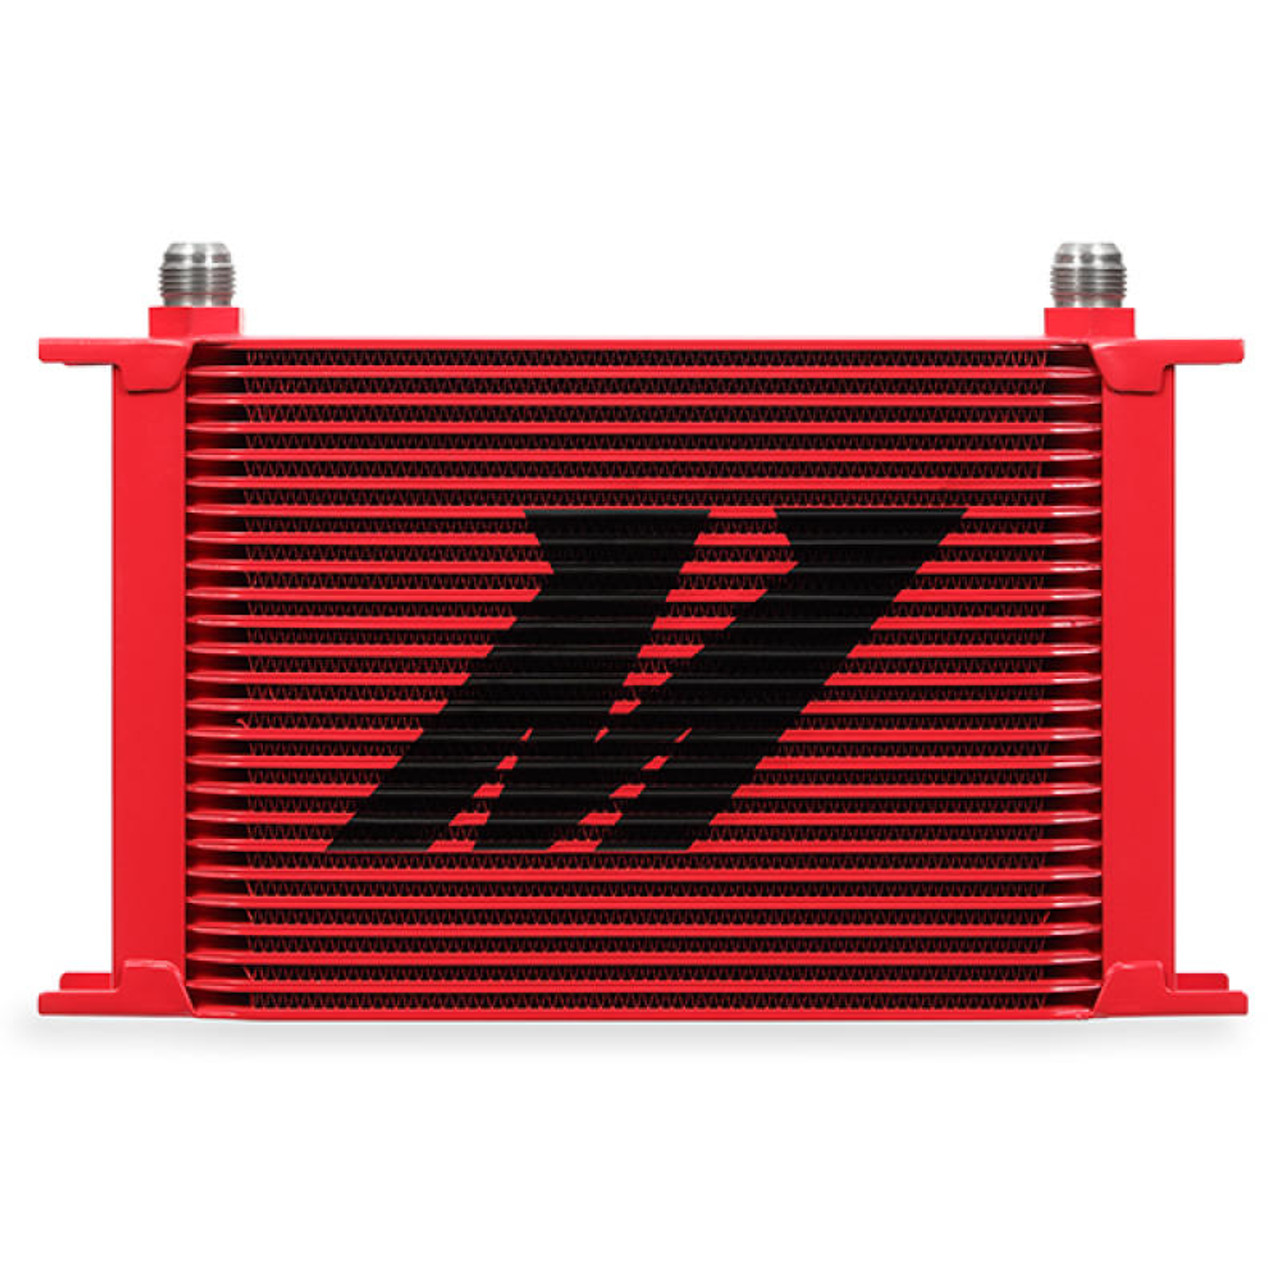 Mishimoto Universal 25 Row Oil Cooler - Red - MMOC-25RD